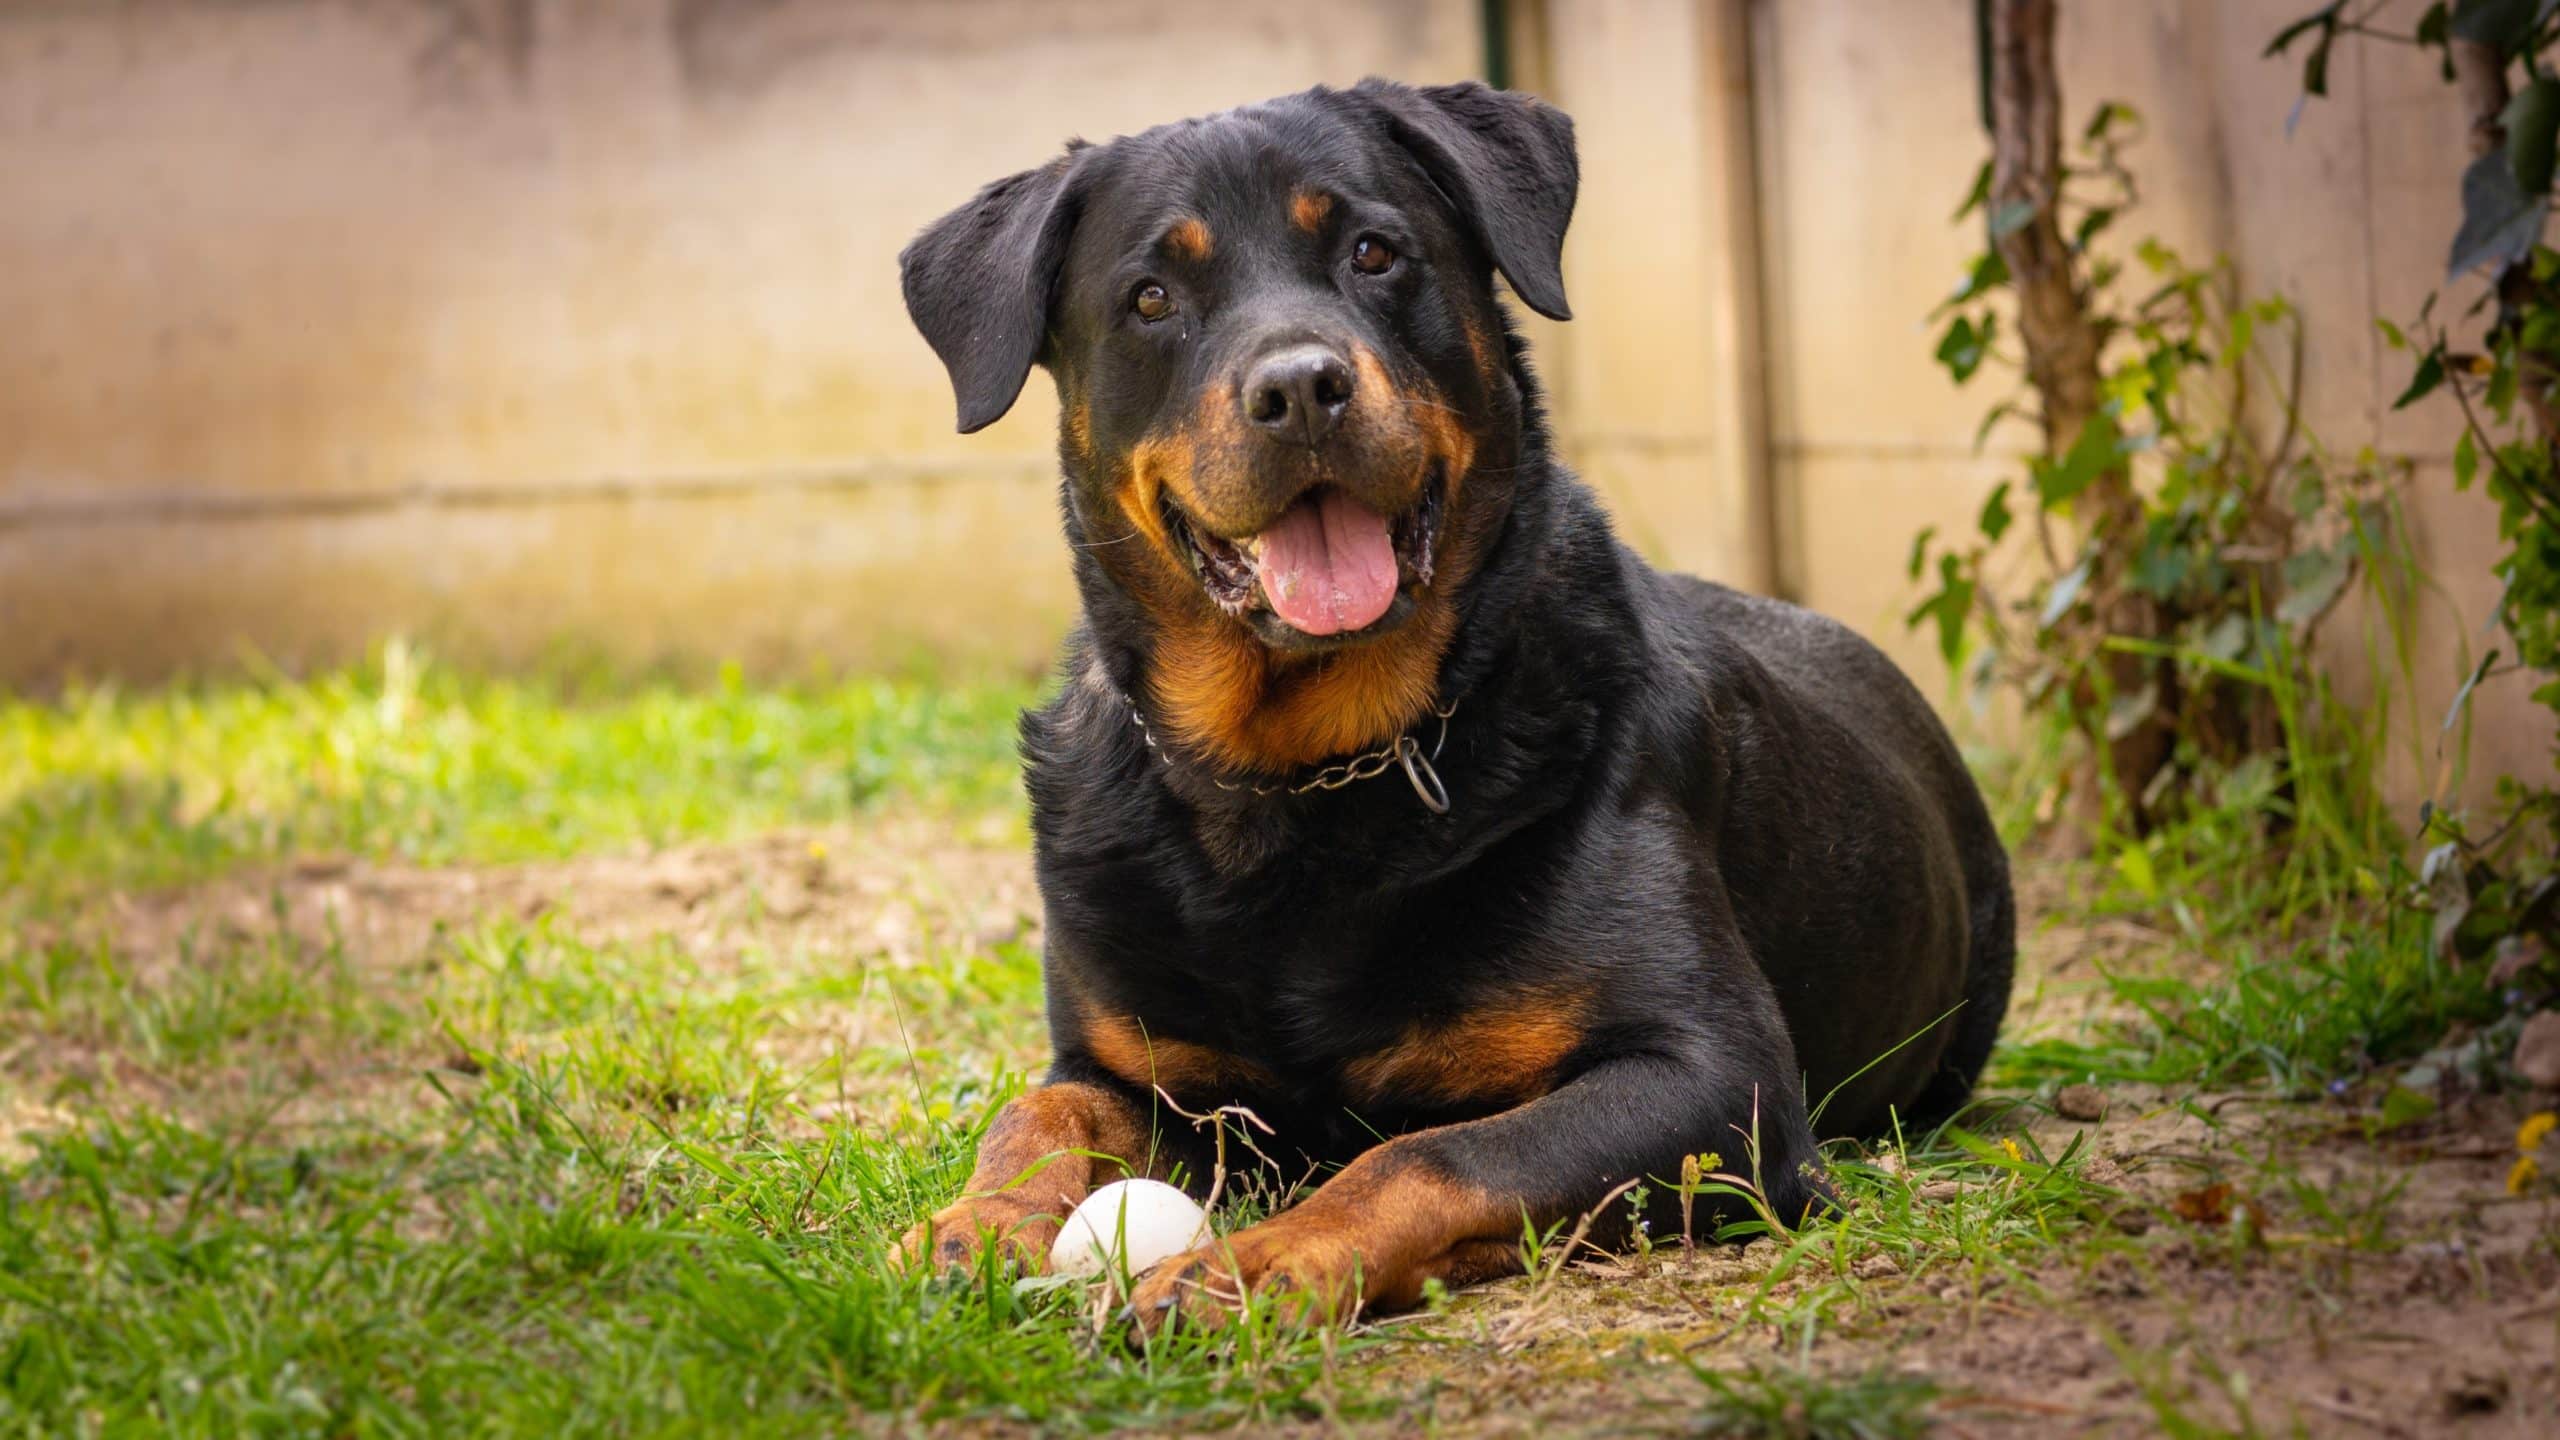 American Rottweiler dog play with the ball in the garden happy